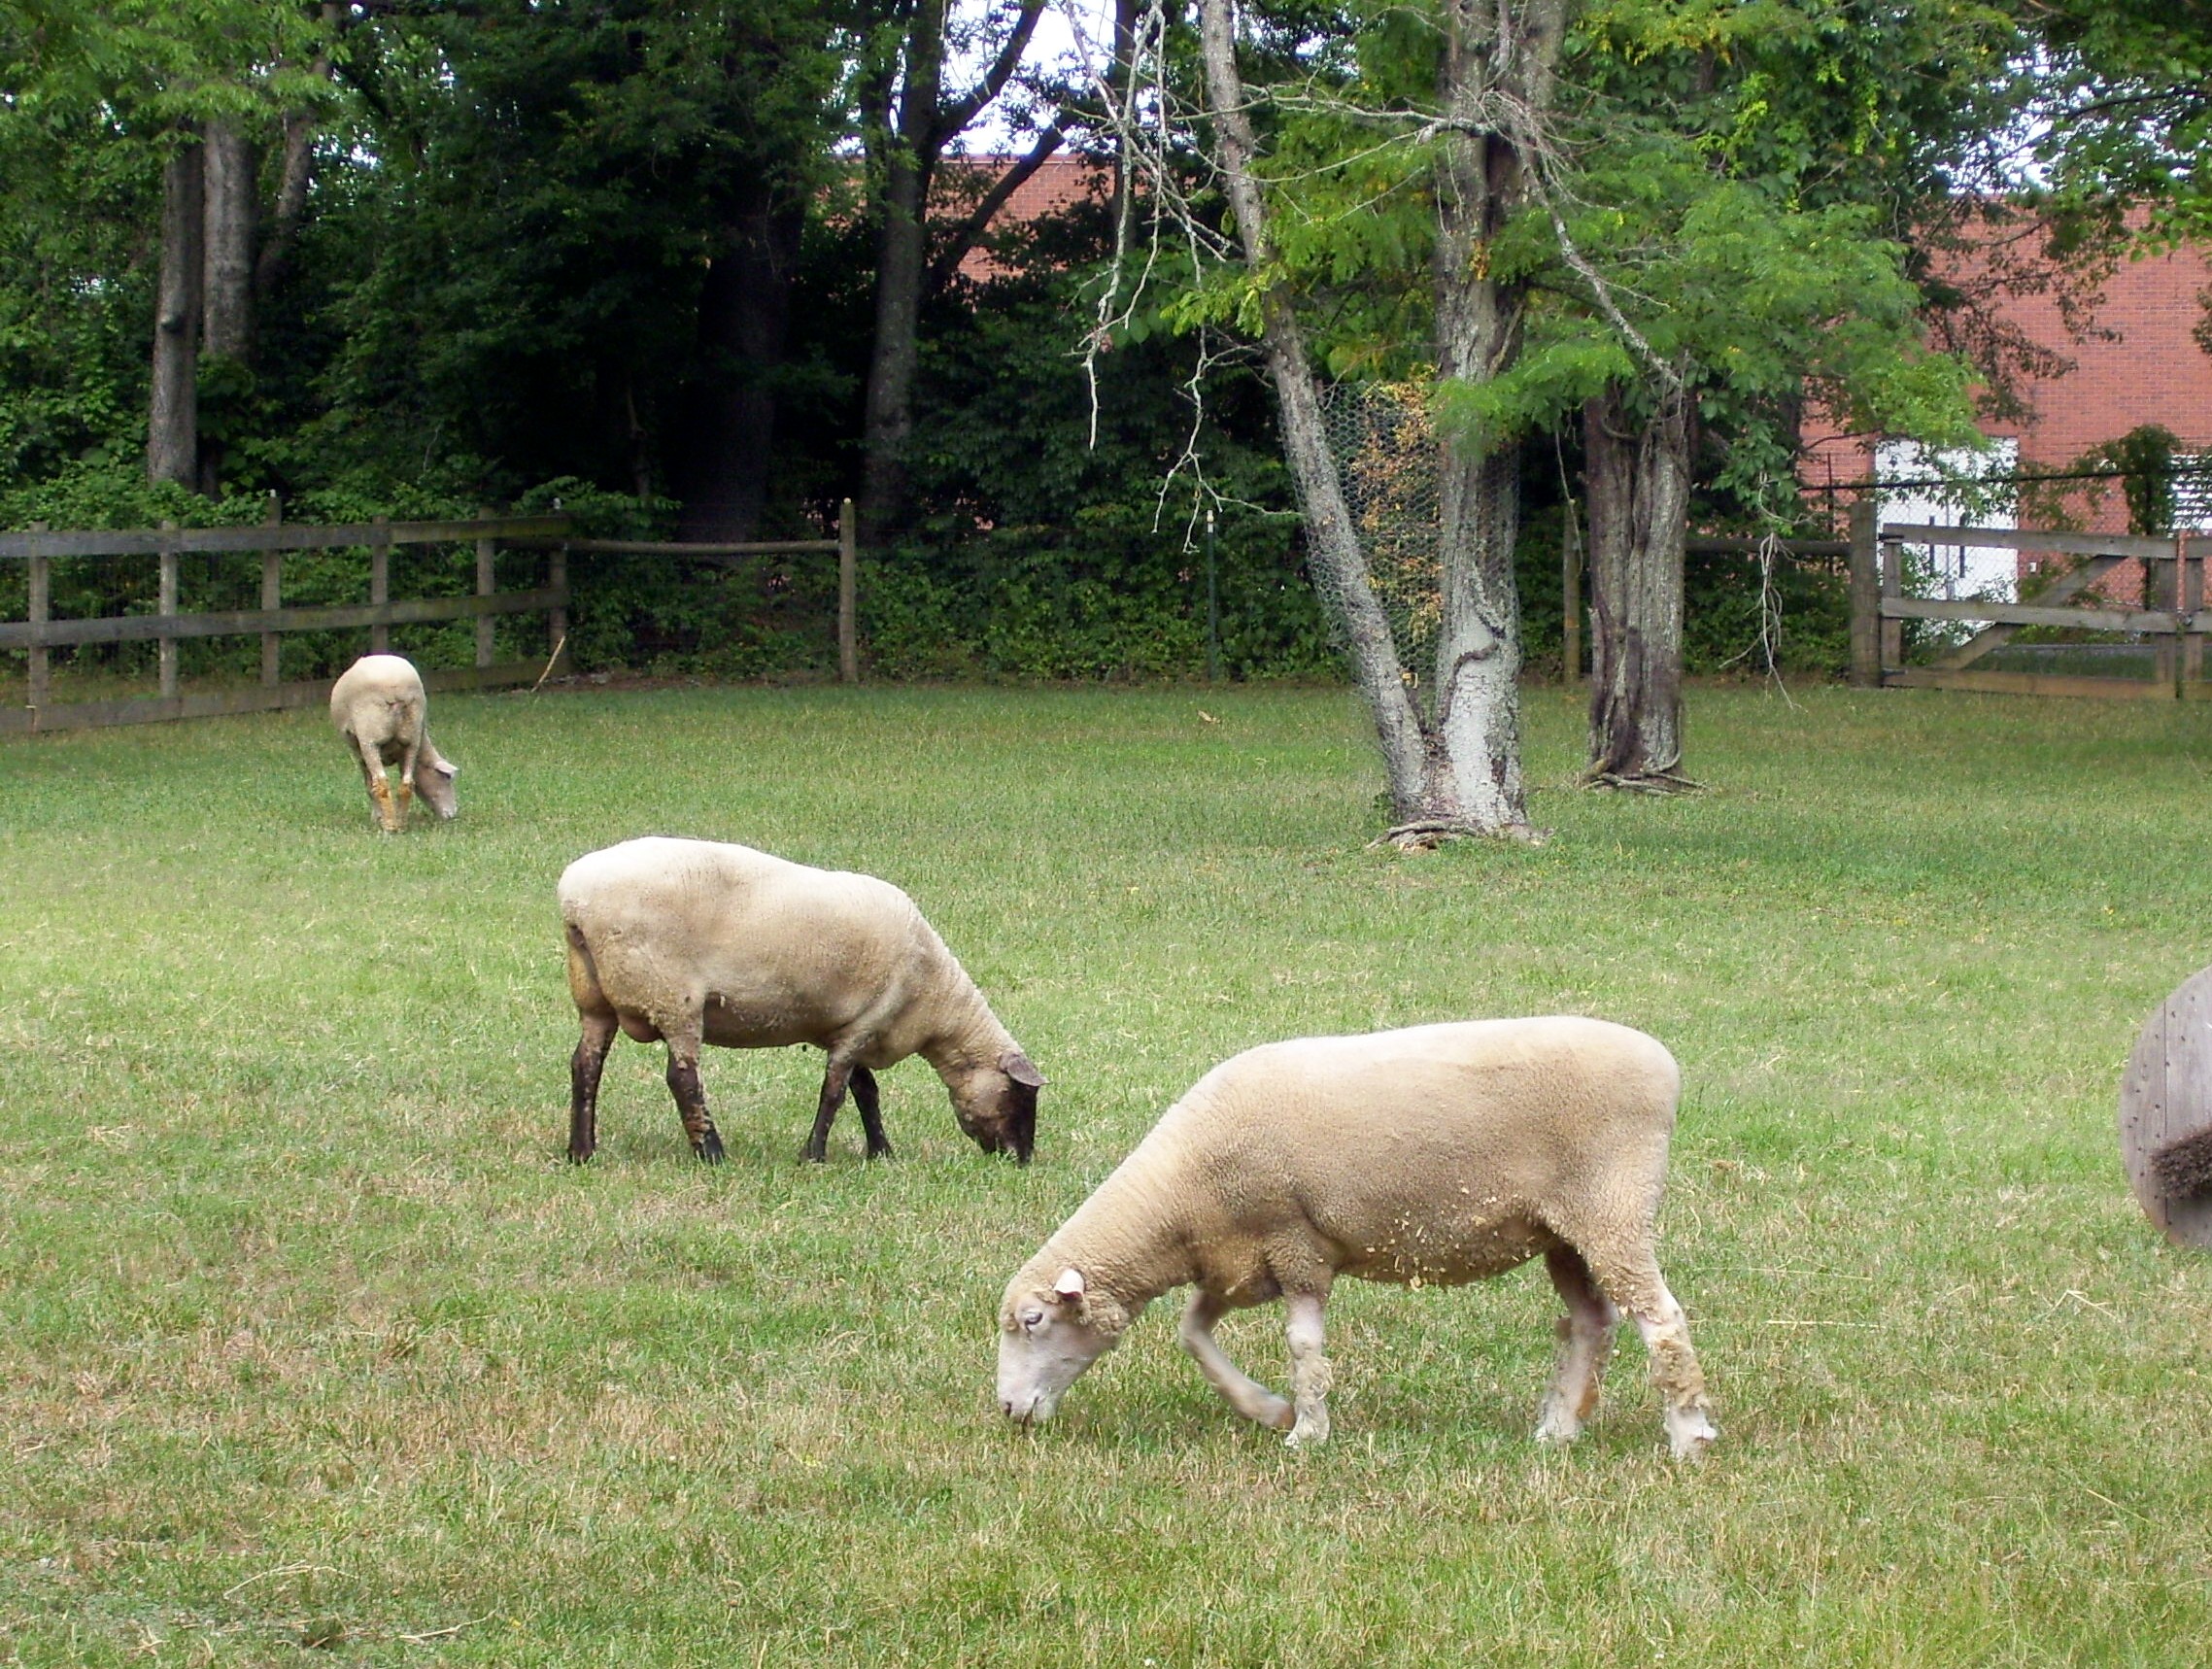 sheep from behind